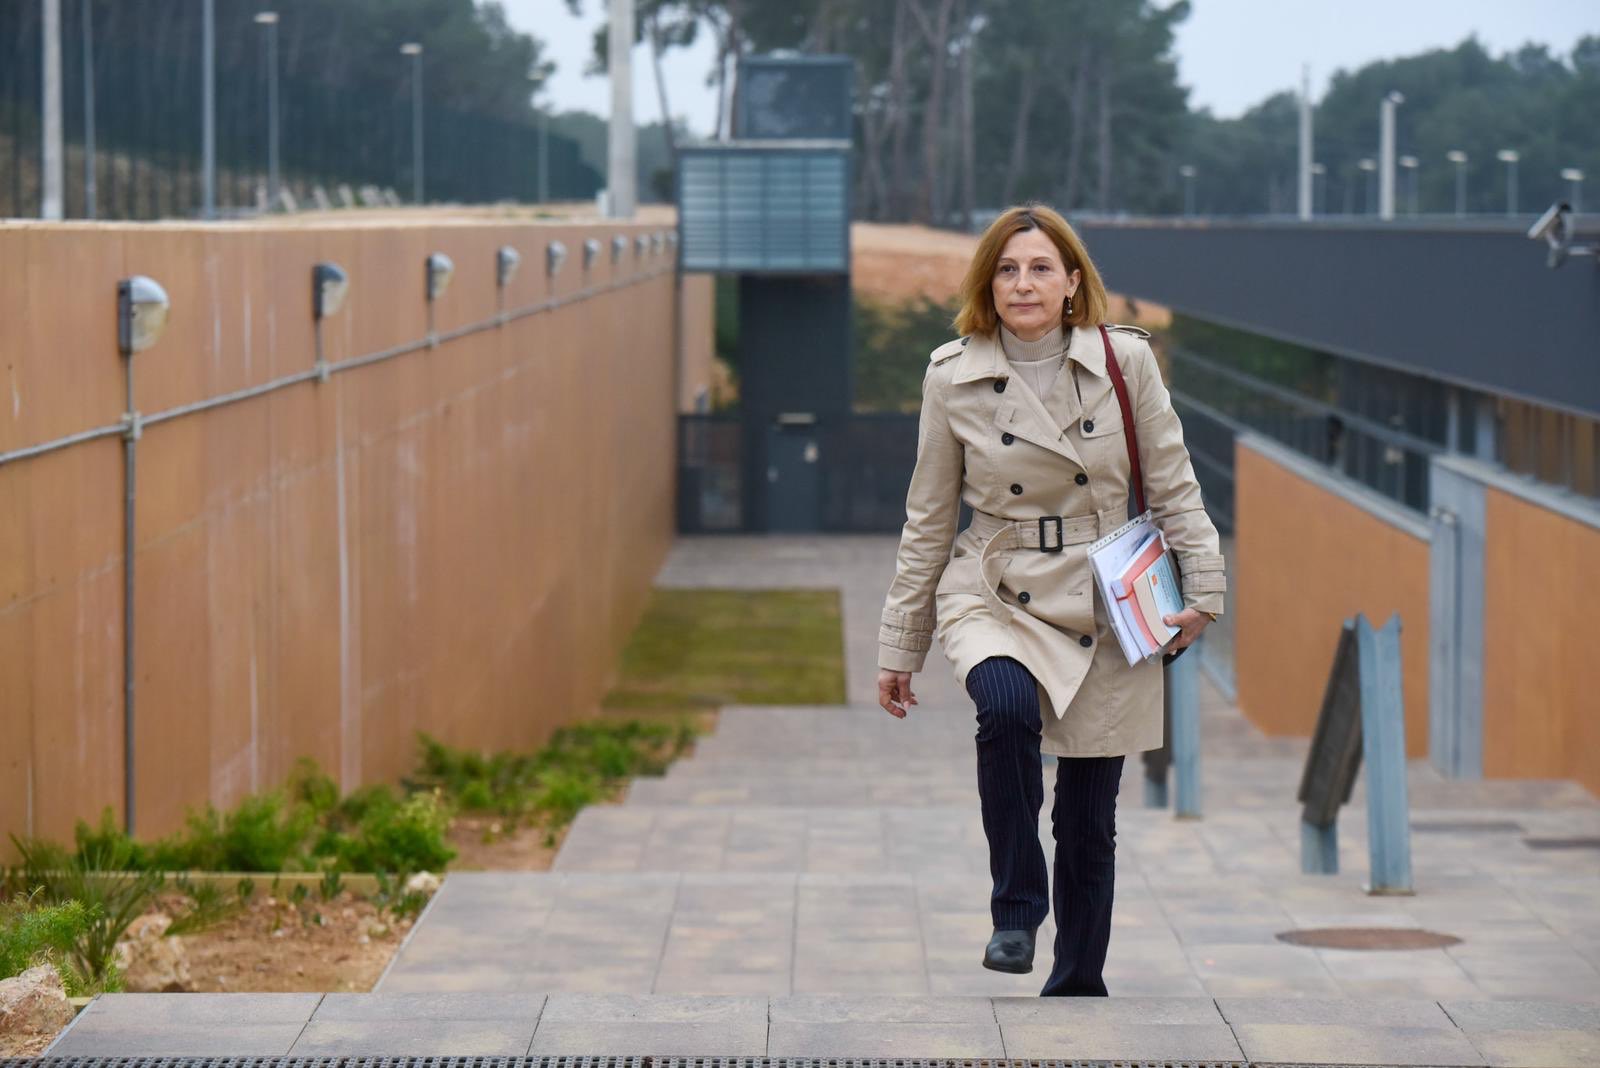 VIDEO | Carme Forcadell sends message of "persistence" on first day of leave